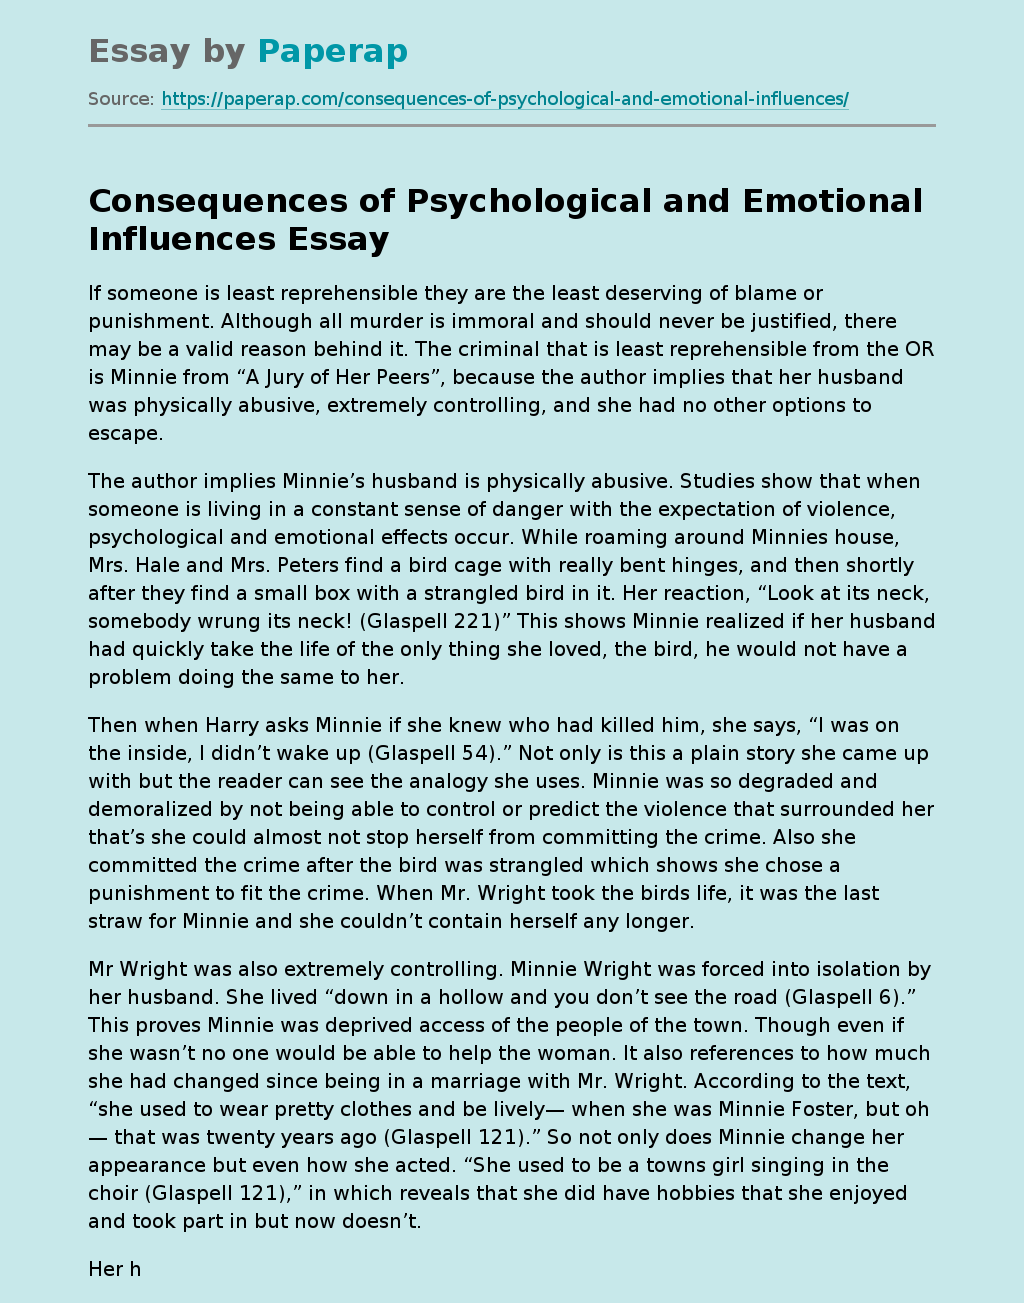 Consequences of Psychological and Emotional Influences